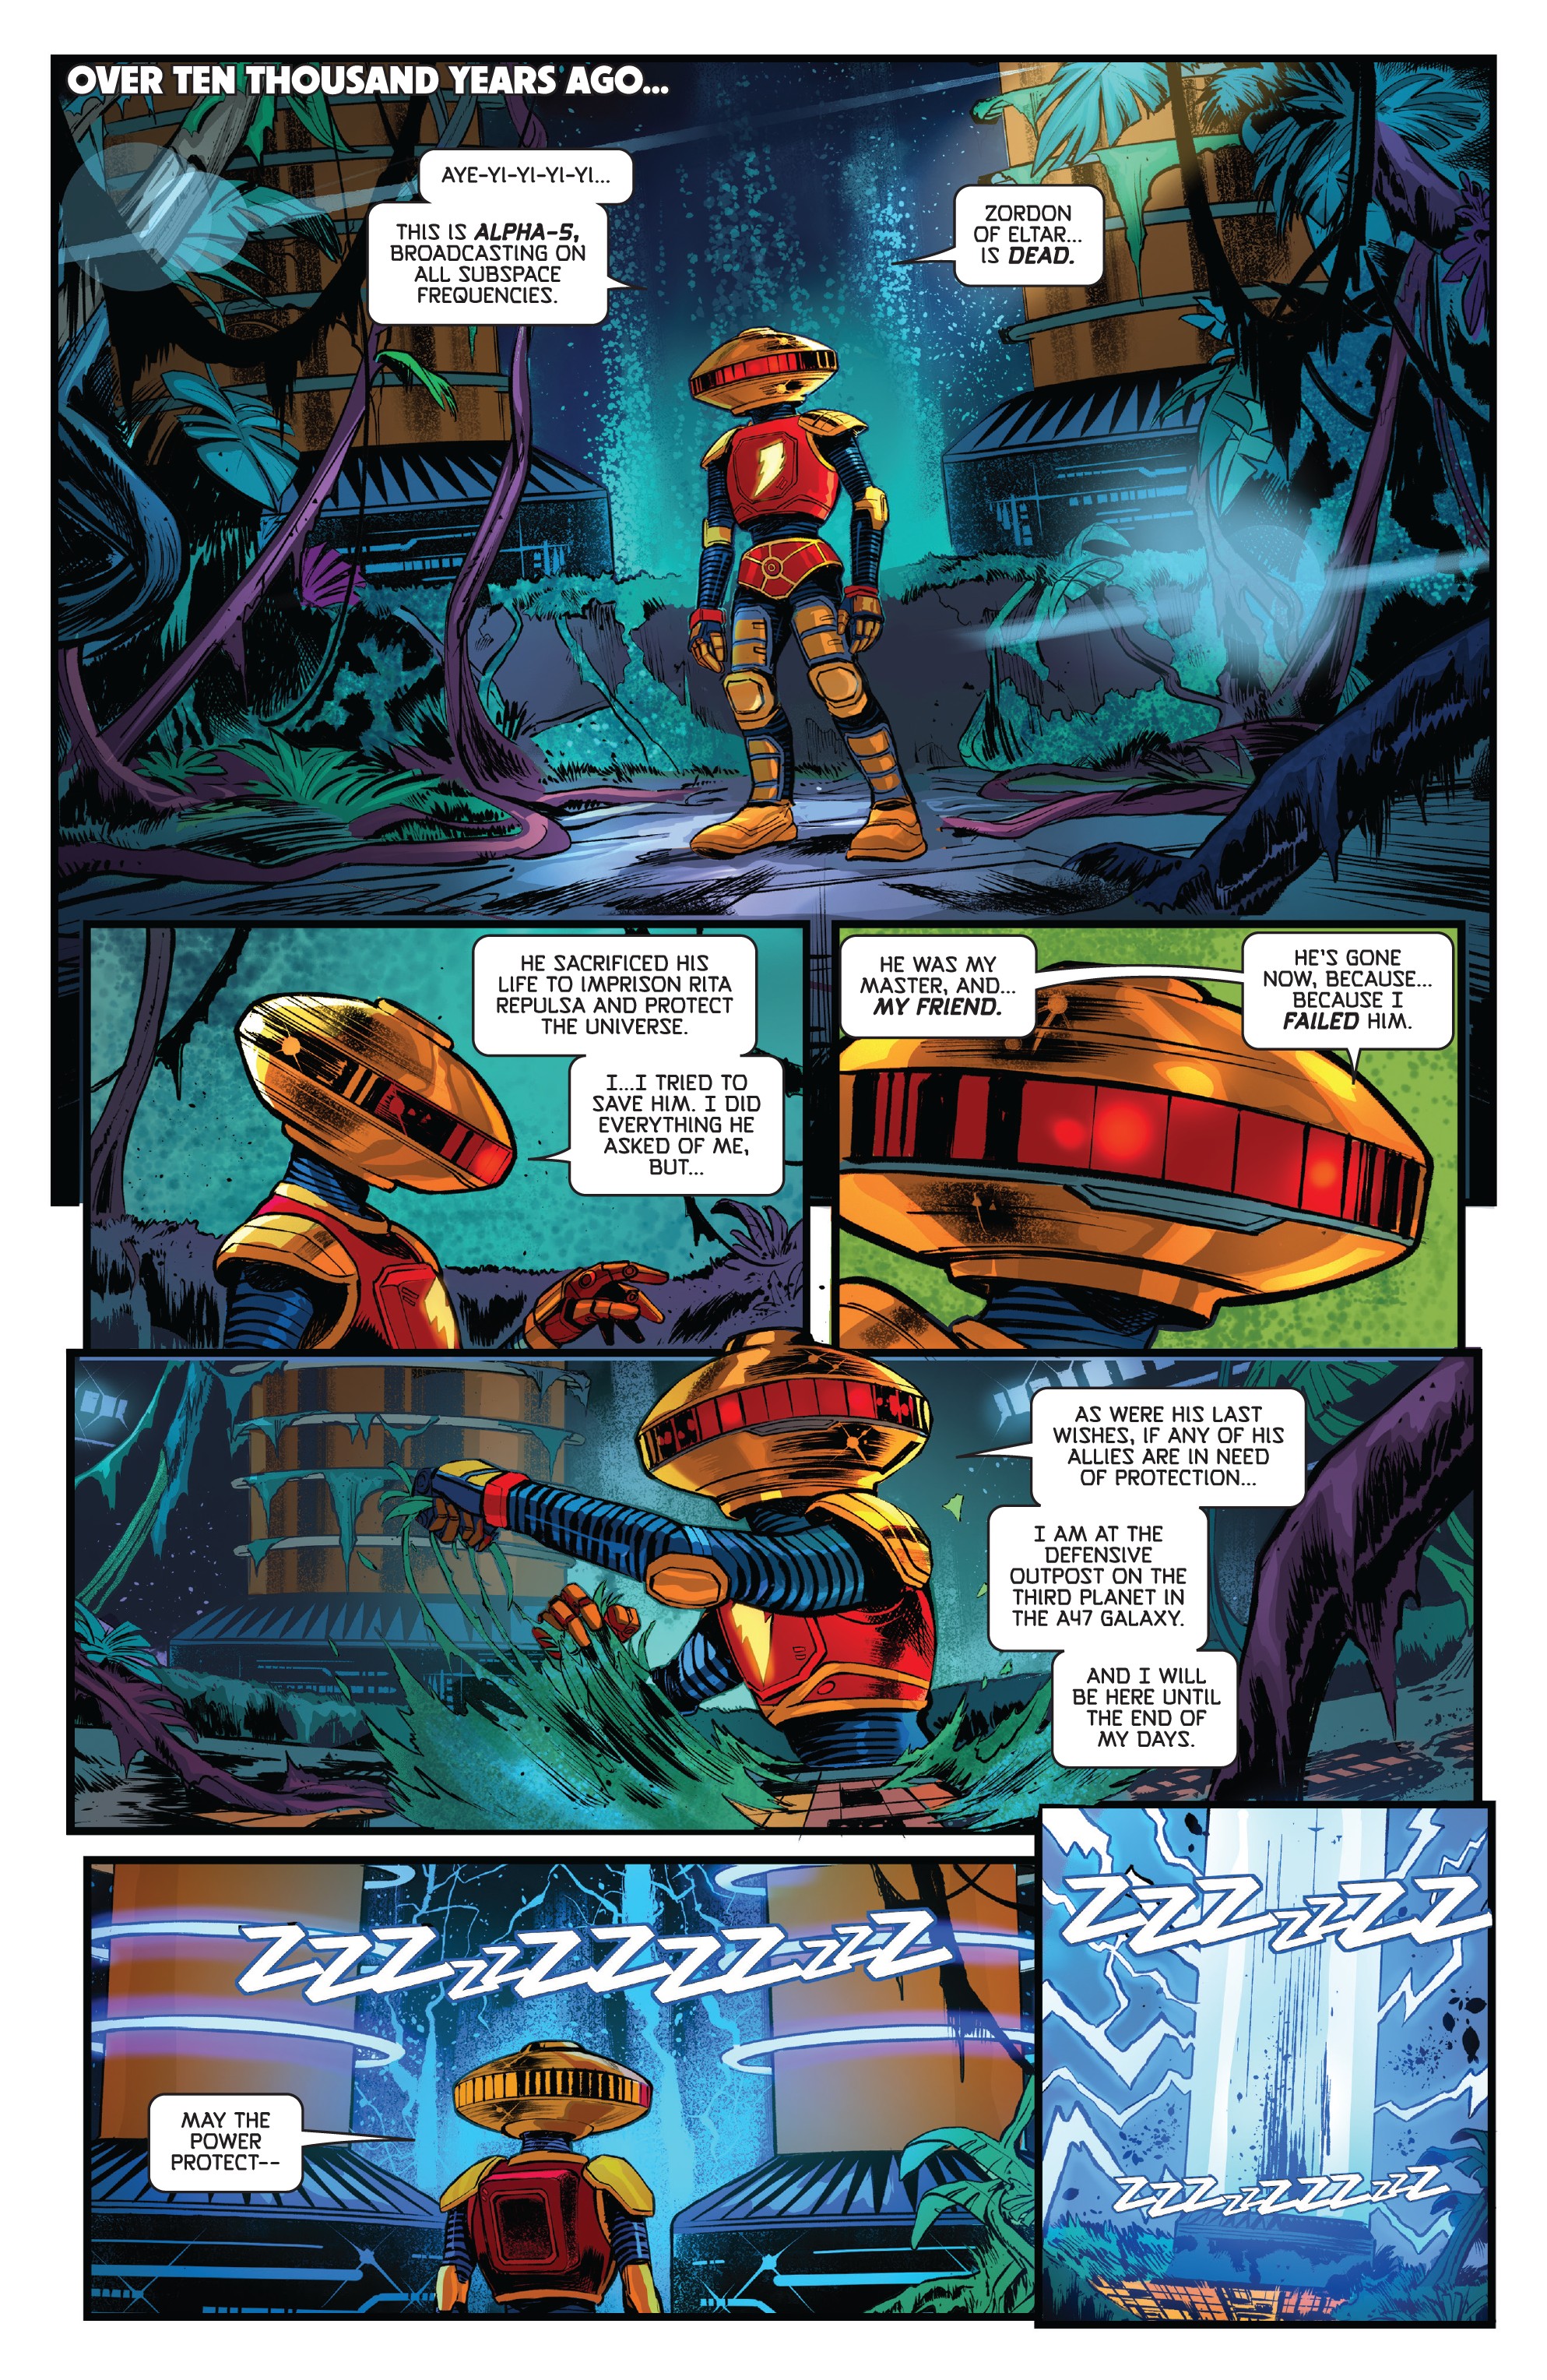 Go Go Power Rangers: Forever Rangers (2019-): Chapter 1 - Page 3